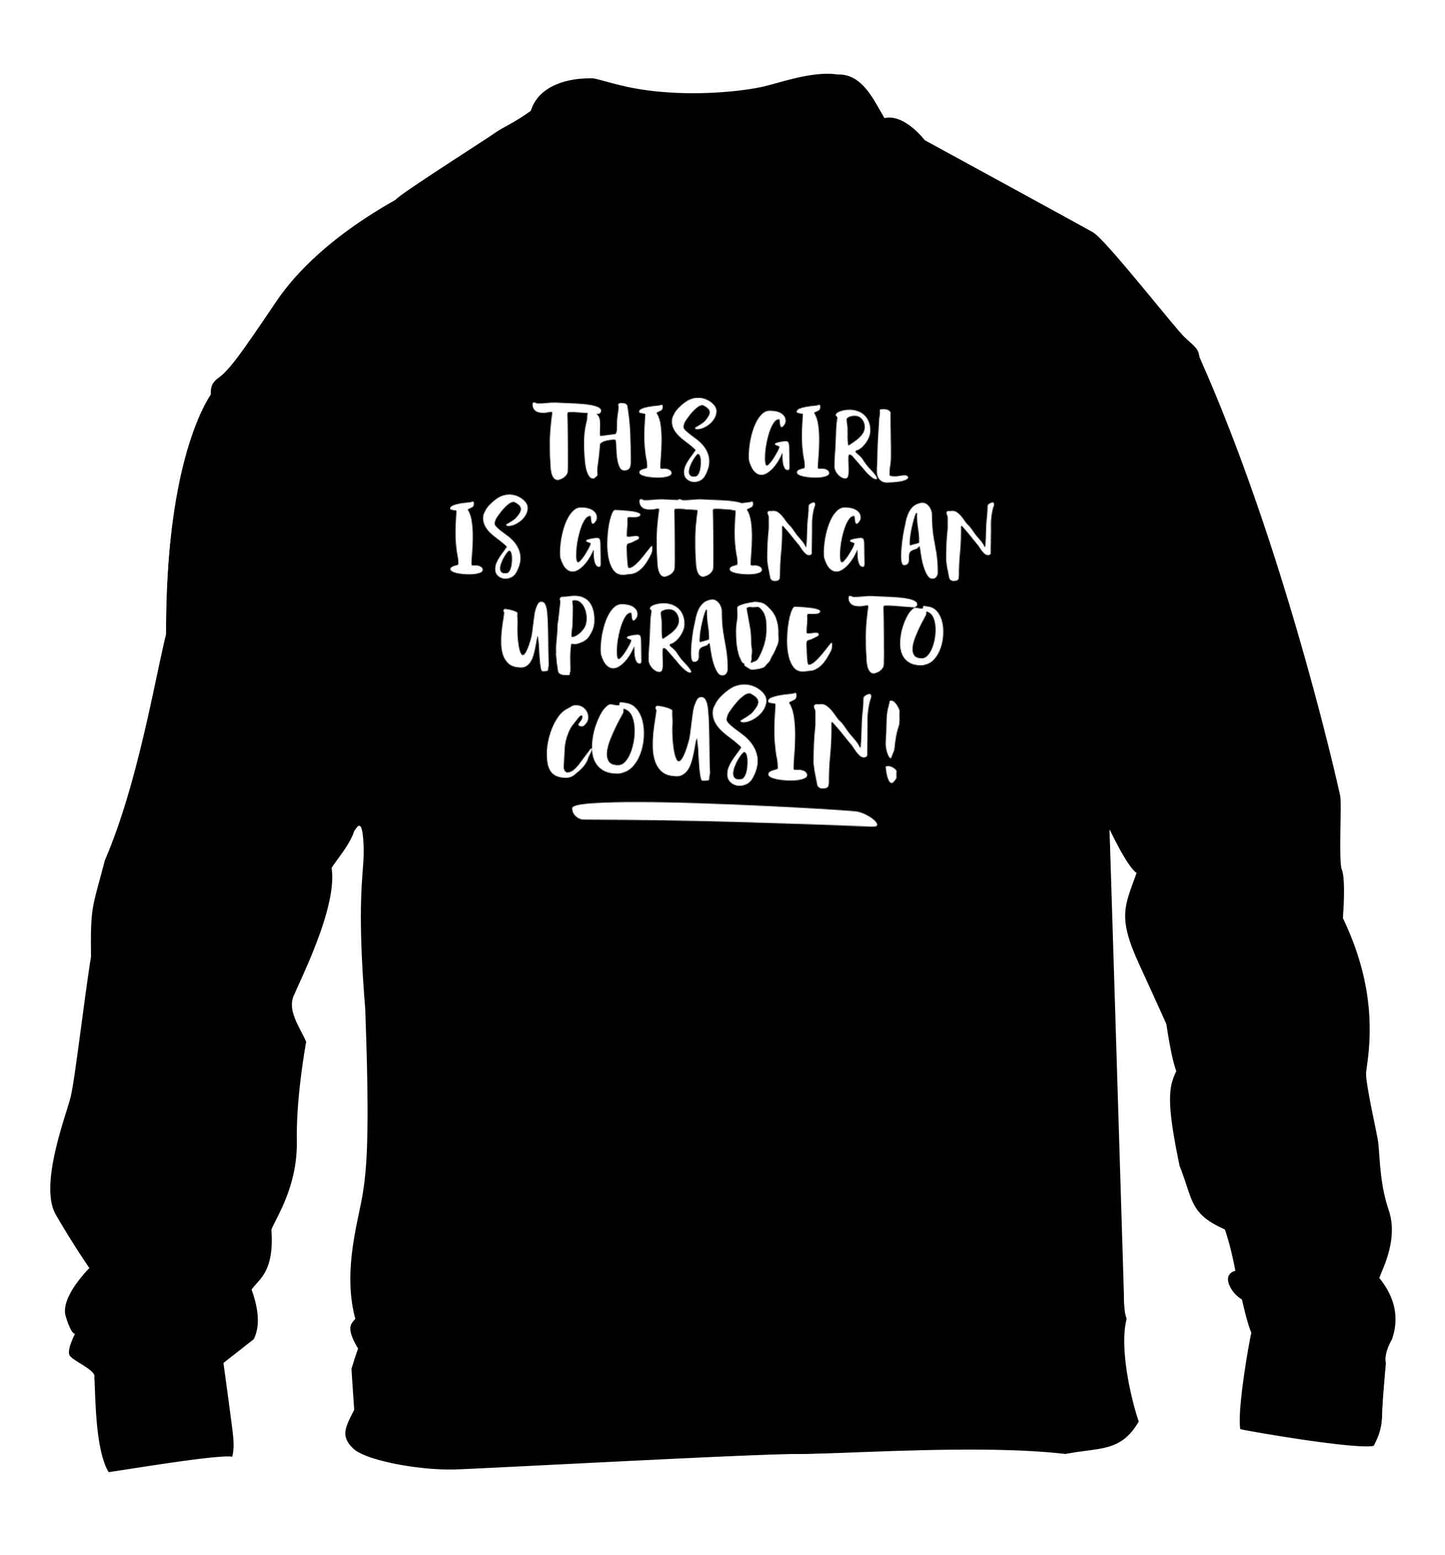 This girl is getting an upgrade to cousin! children's black sweater 12-13 Years